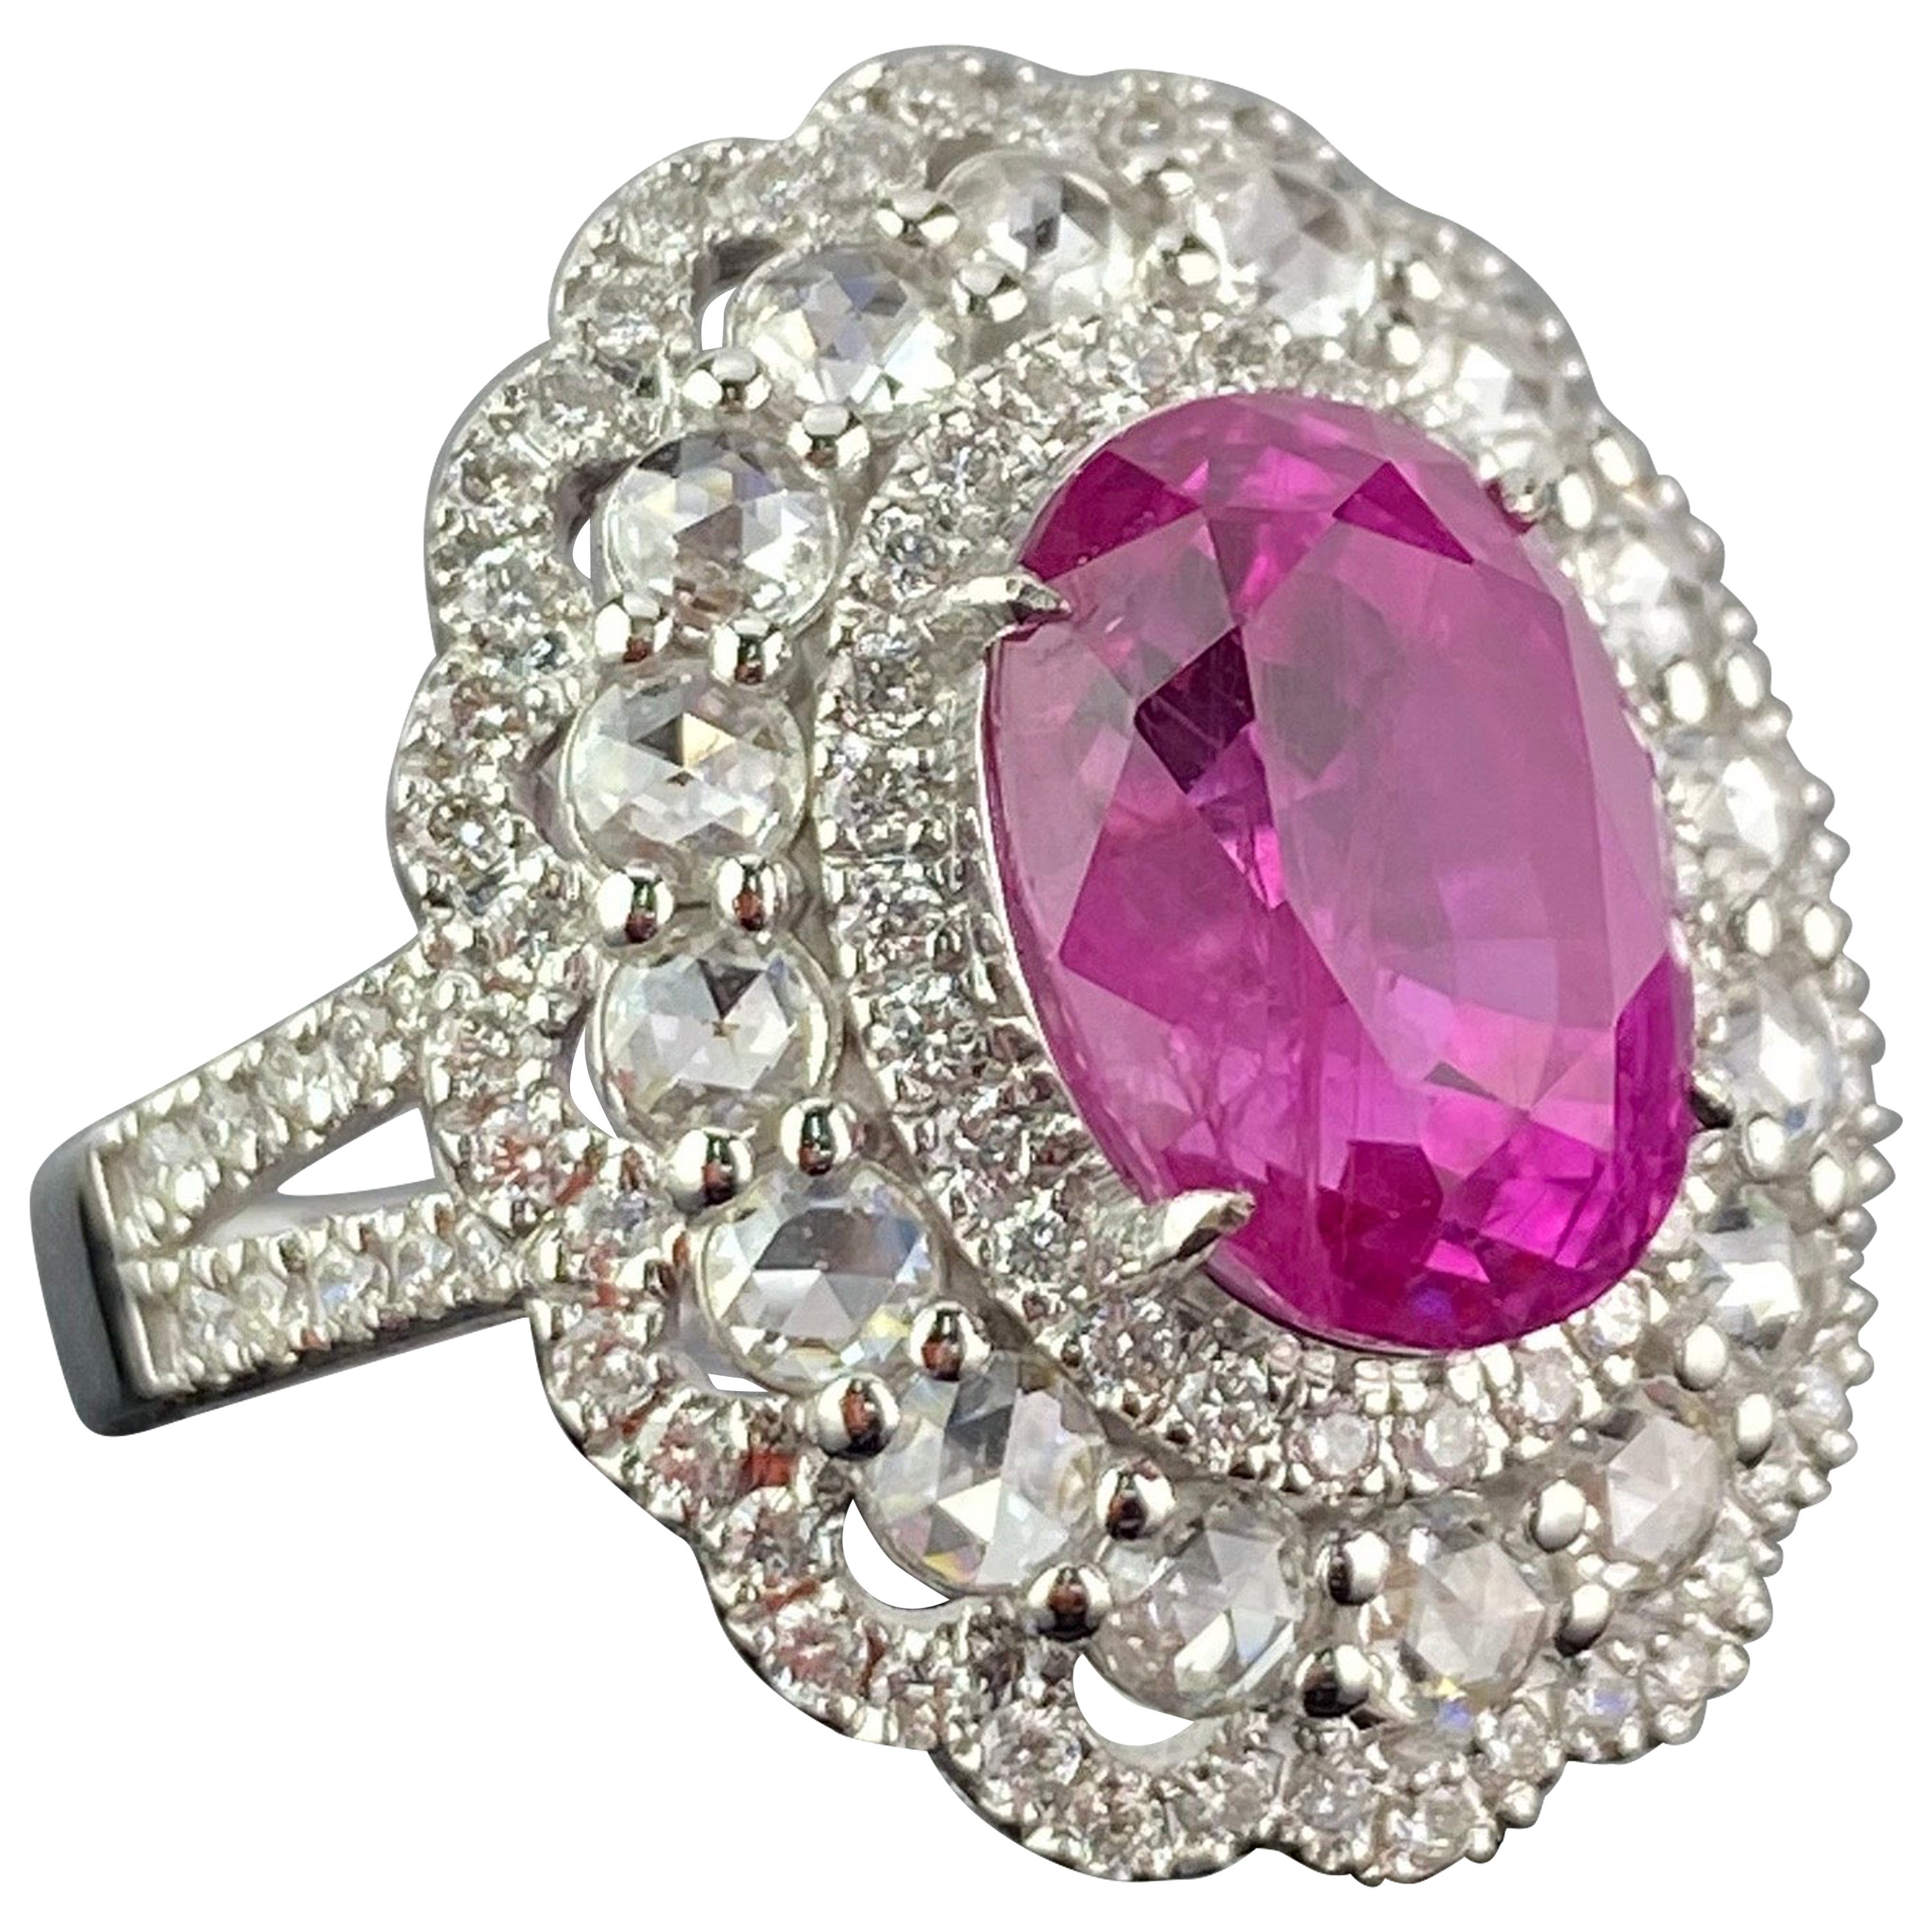 Certified 6.24 Carat Oval Shape Ruby and Diamond Cocktail Ring